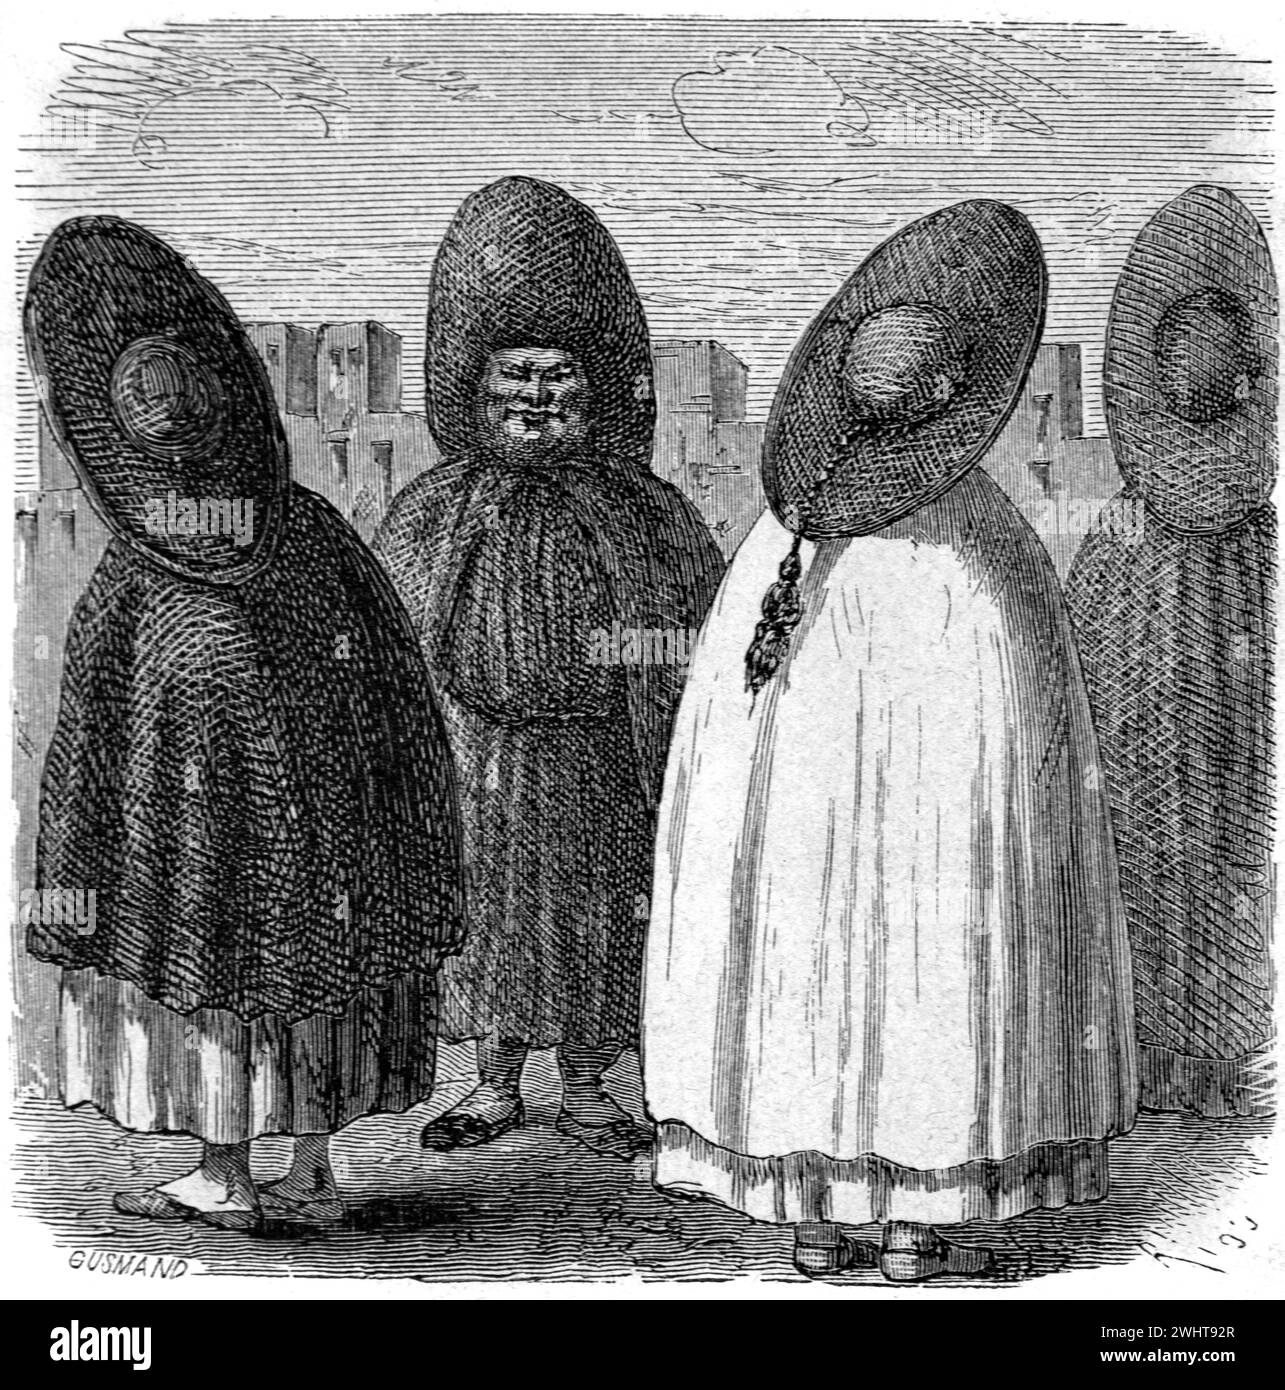 Indigenous or Quechuan Christian Monks Wearing Religious Clothing, Clerical Clothing, Religious Habit, Dress or Vestment and Wide-Brimmed Hats, Cuzco or Cusco Peru. Vintage or Historic Engraving or Illustration 1863 Stock Photo